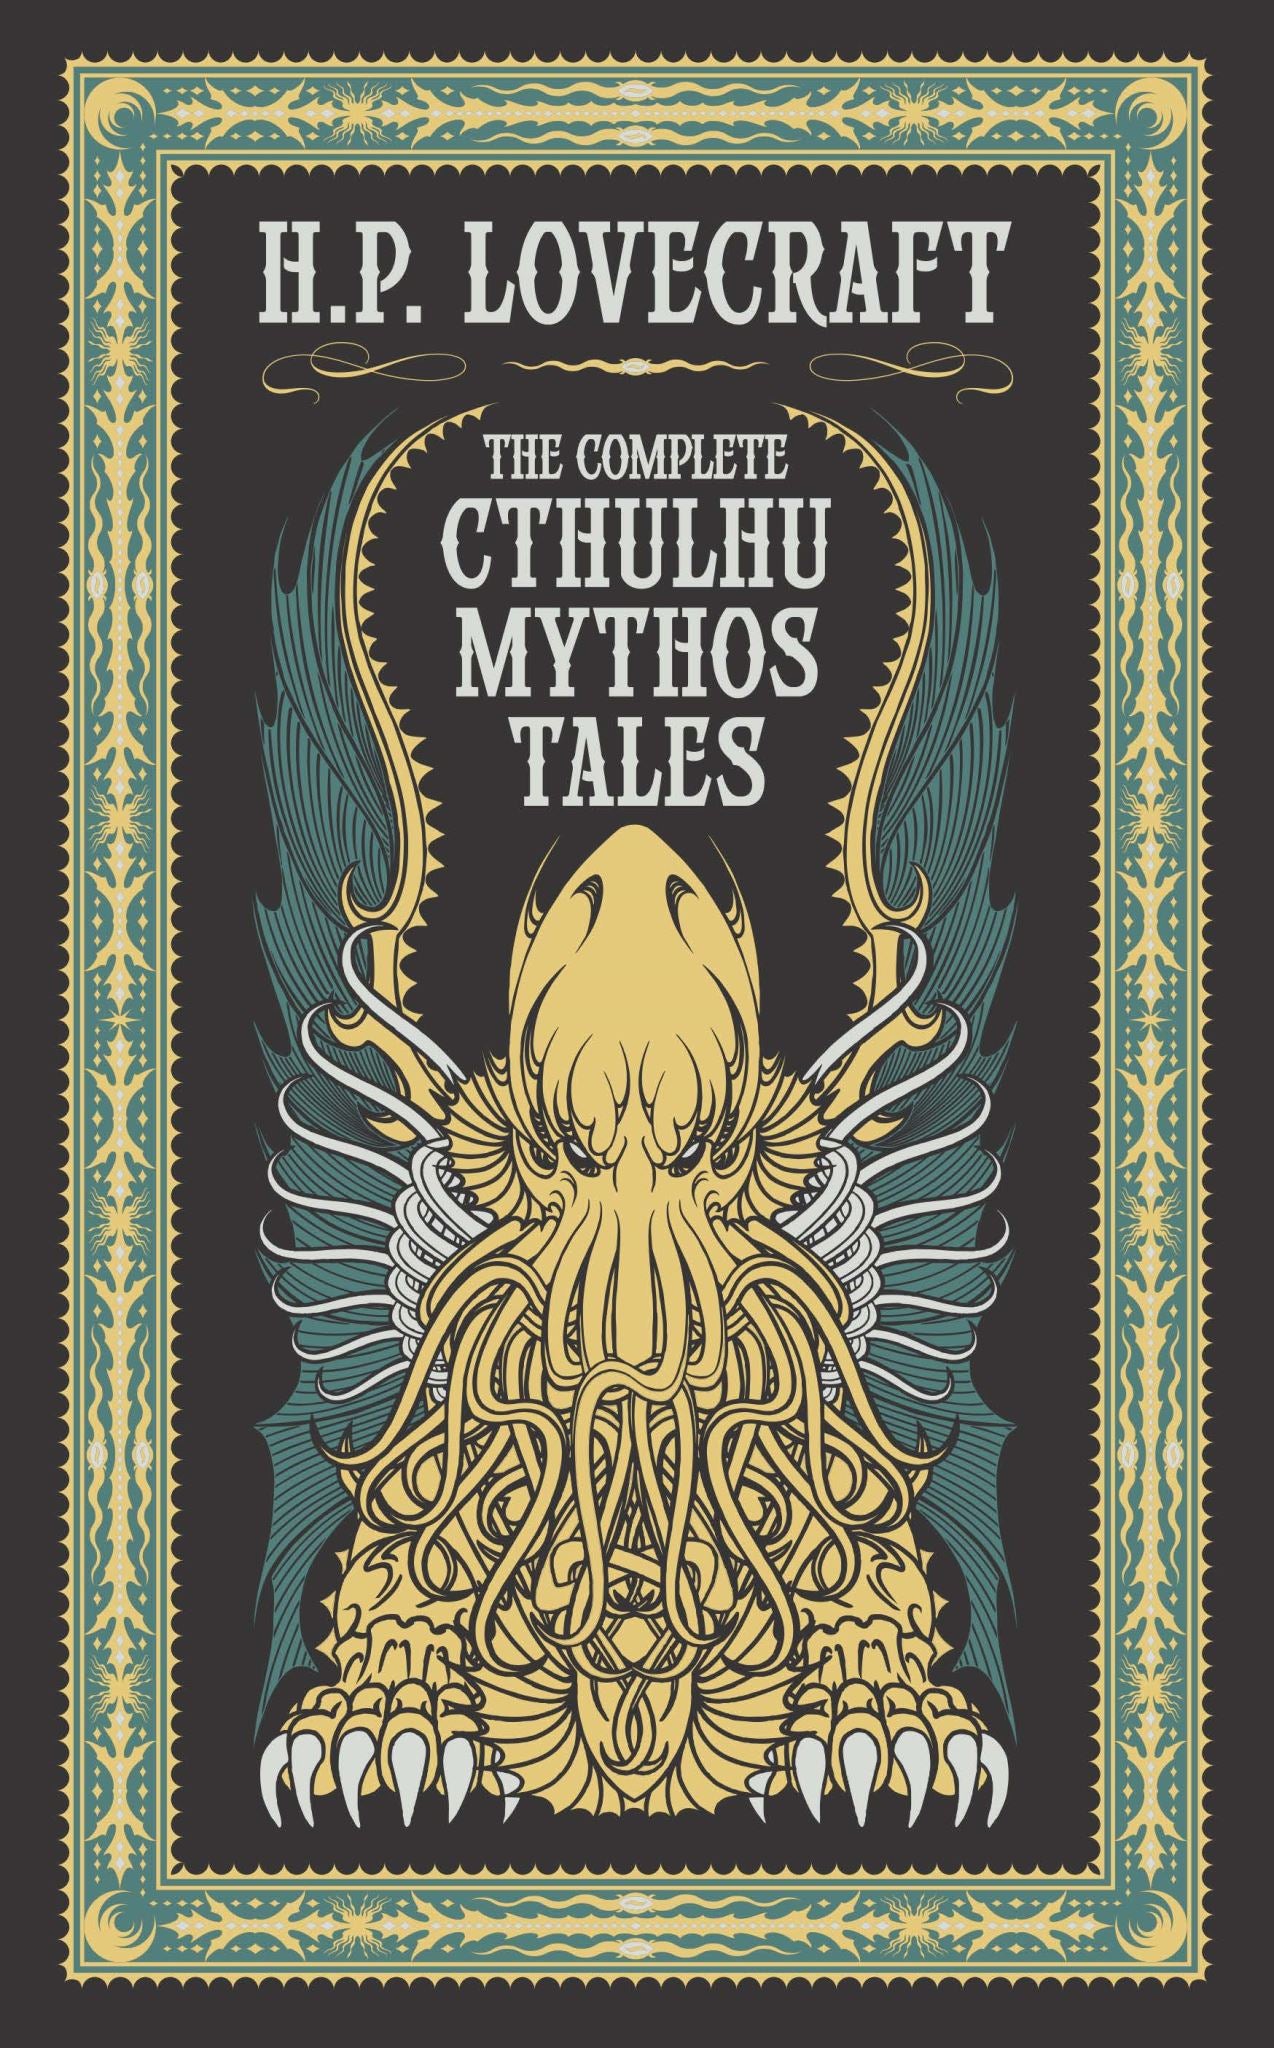 Complete Cthulhu Mythos Tales (Barnes & Noble Collectible Classics: Omnibus Edit